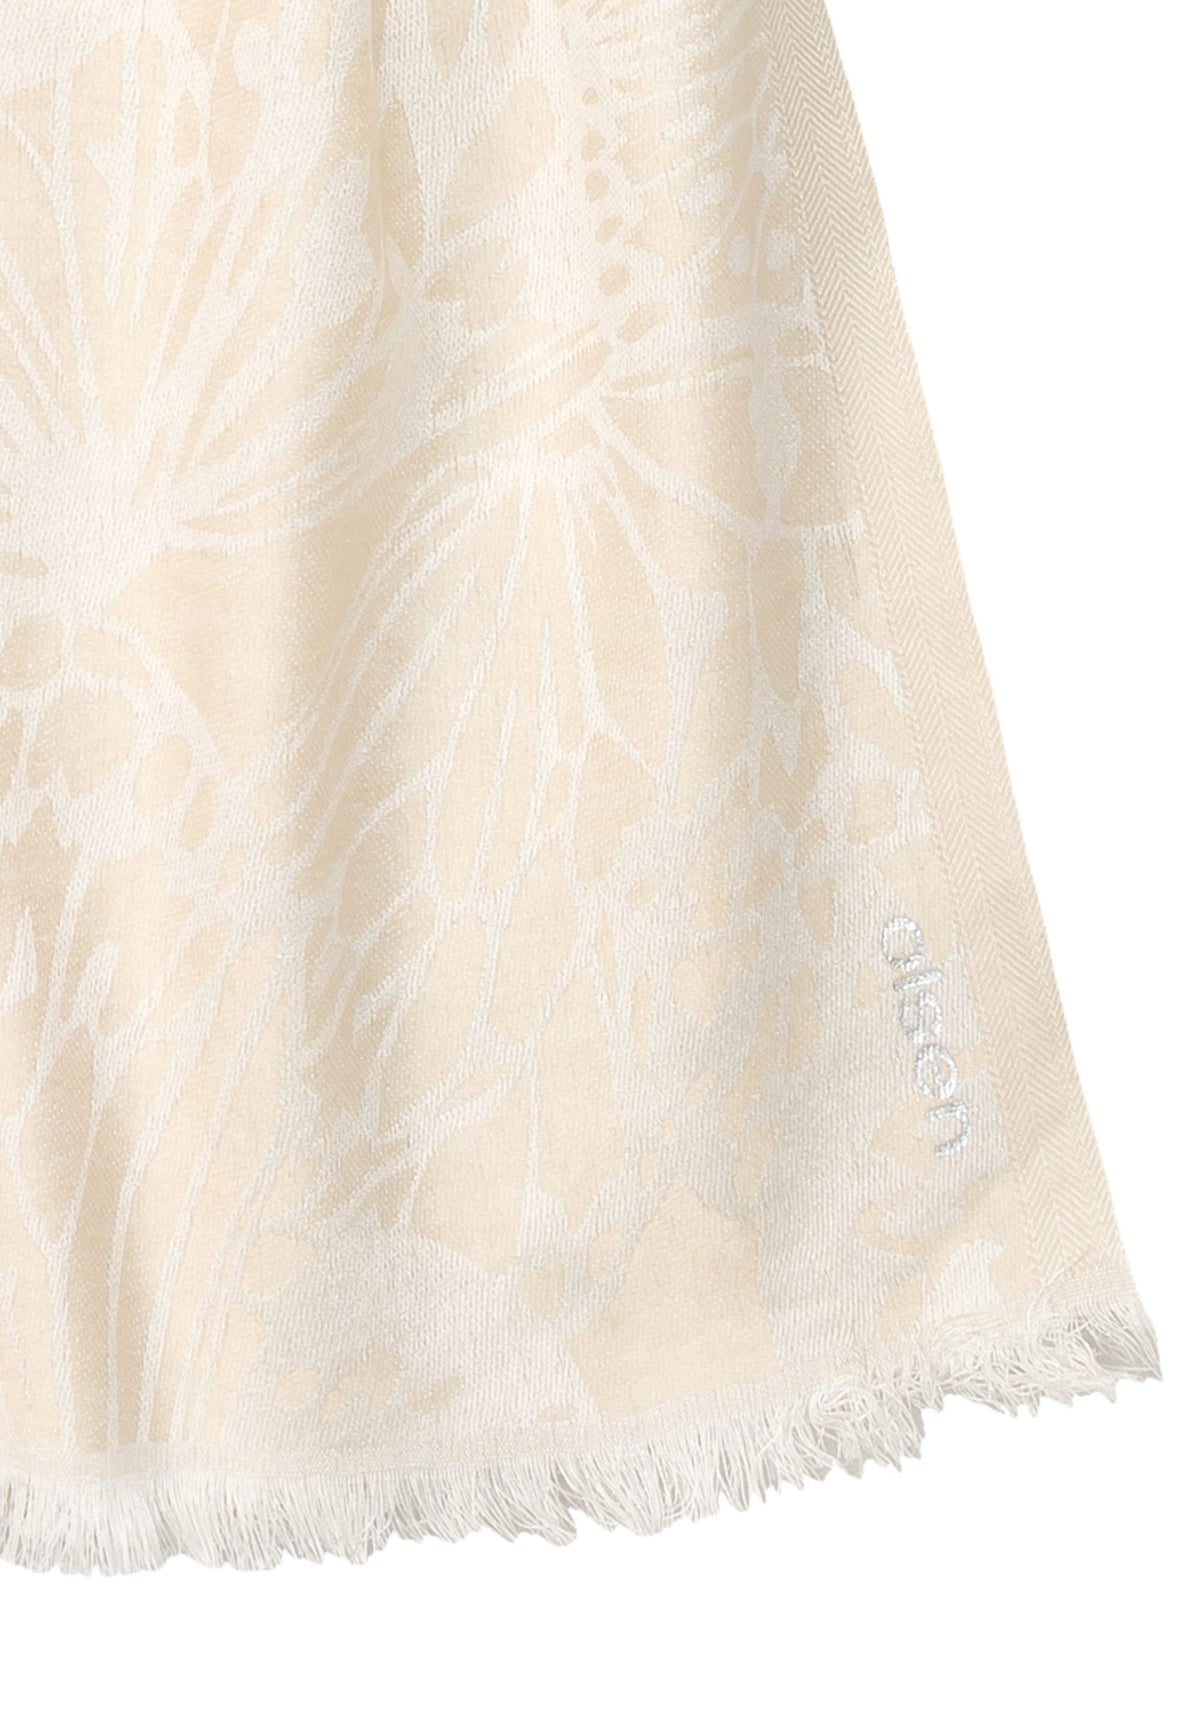 Tonal Butterfly Scarf with Frayed Edge Trim